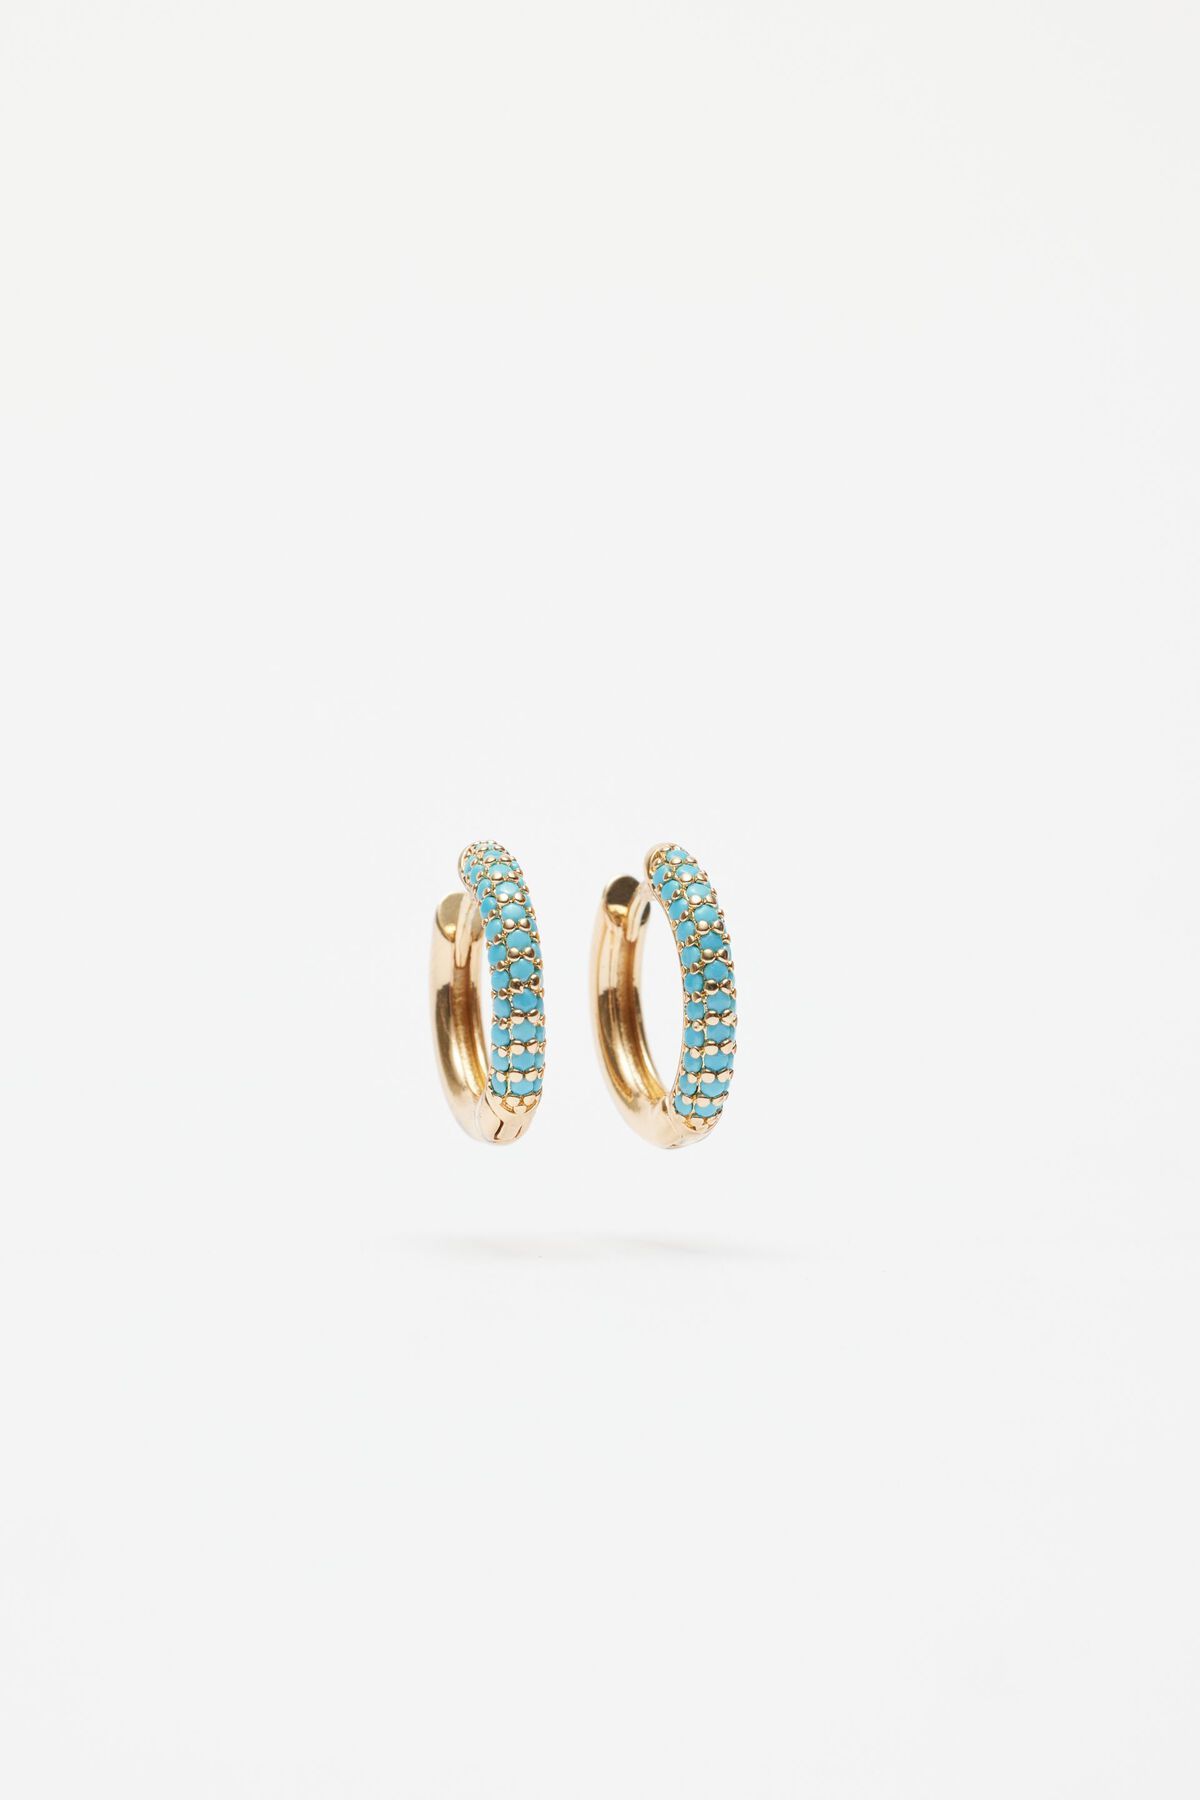 Dynamite Round Pave Hinge Earrings. 2